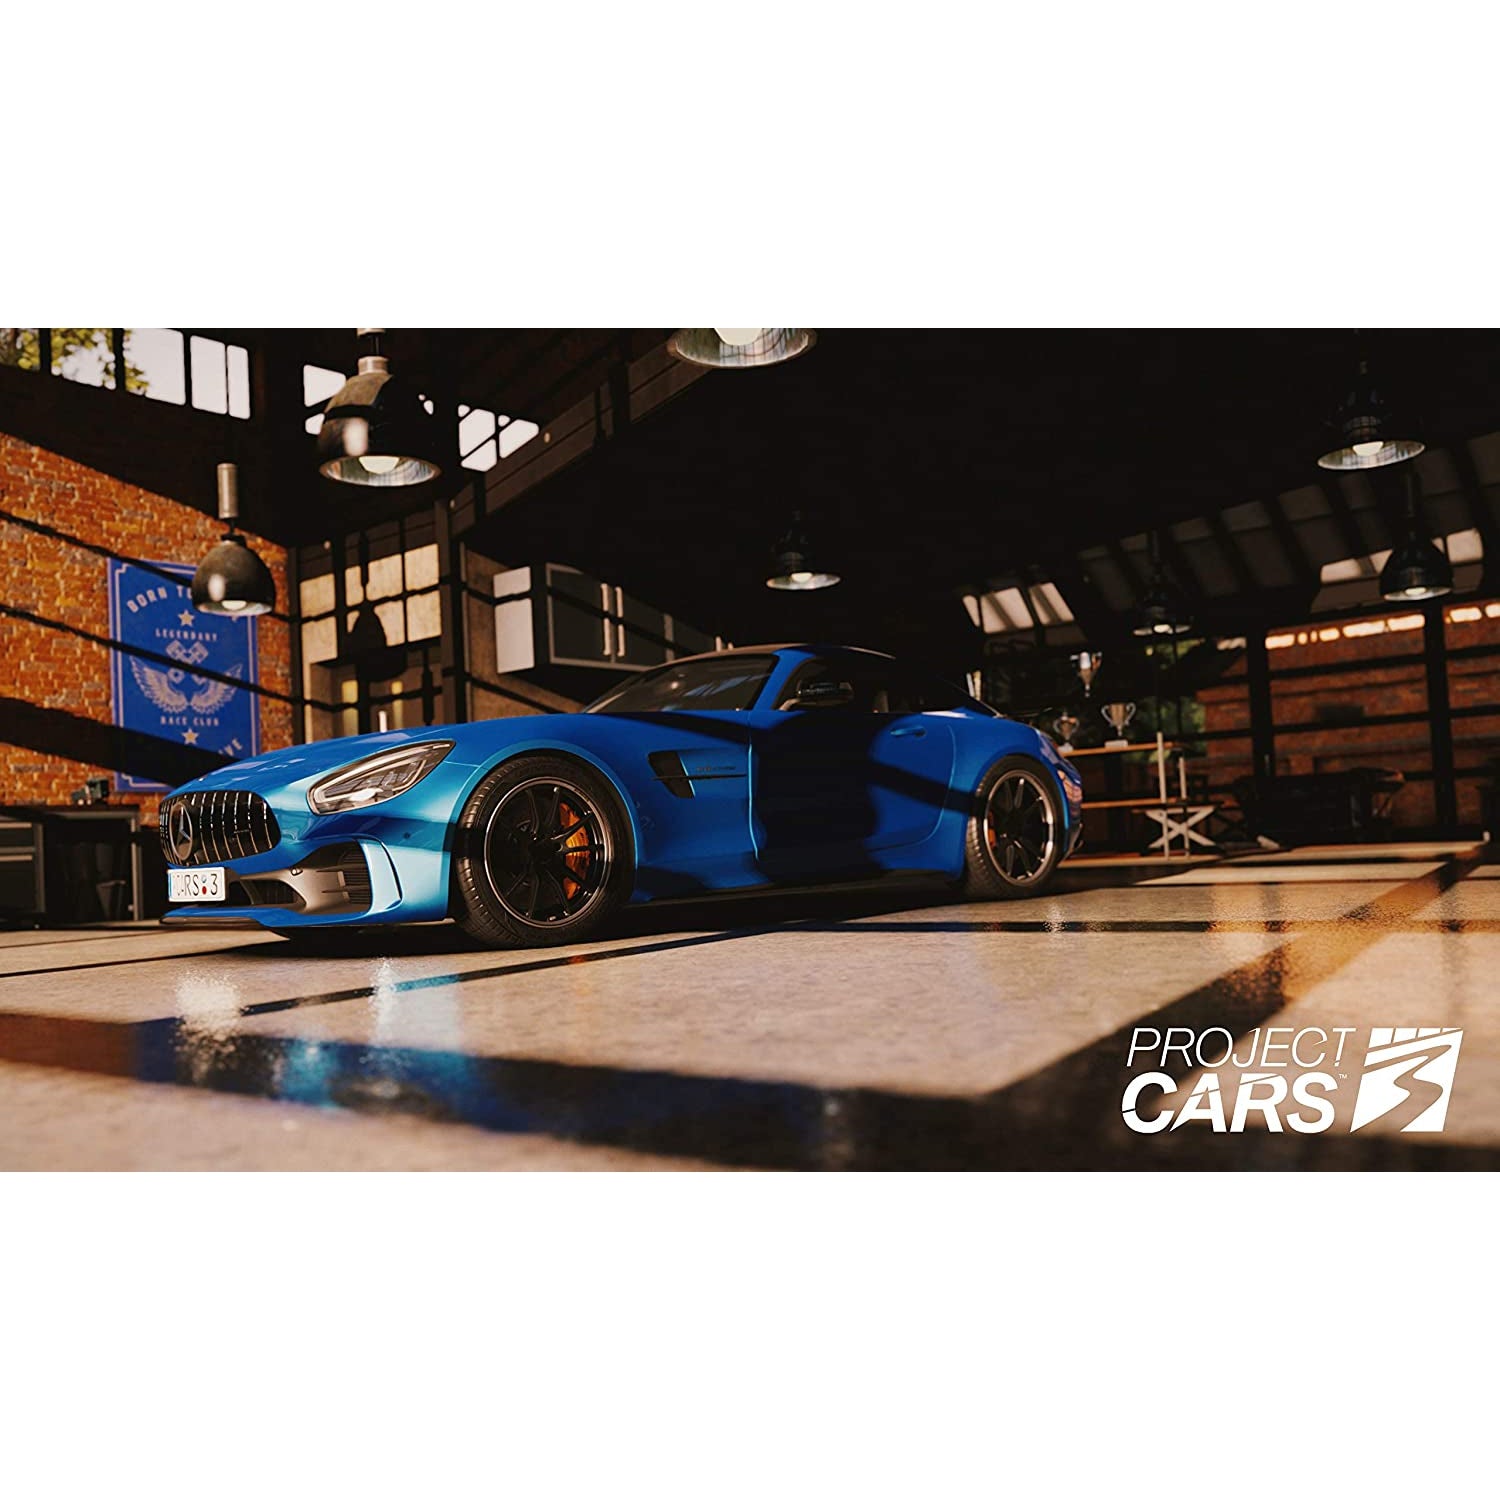 Project Cars 3 (PS4), Video Game for Playstation 4